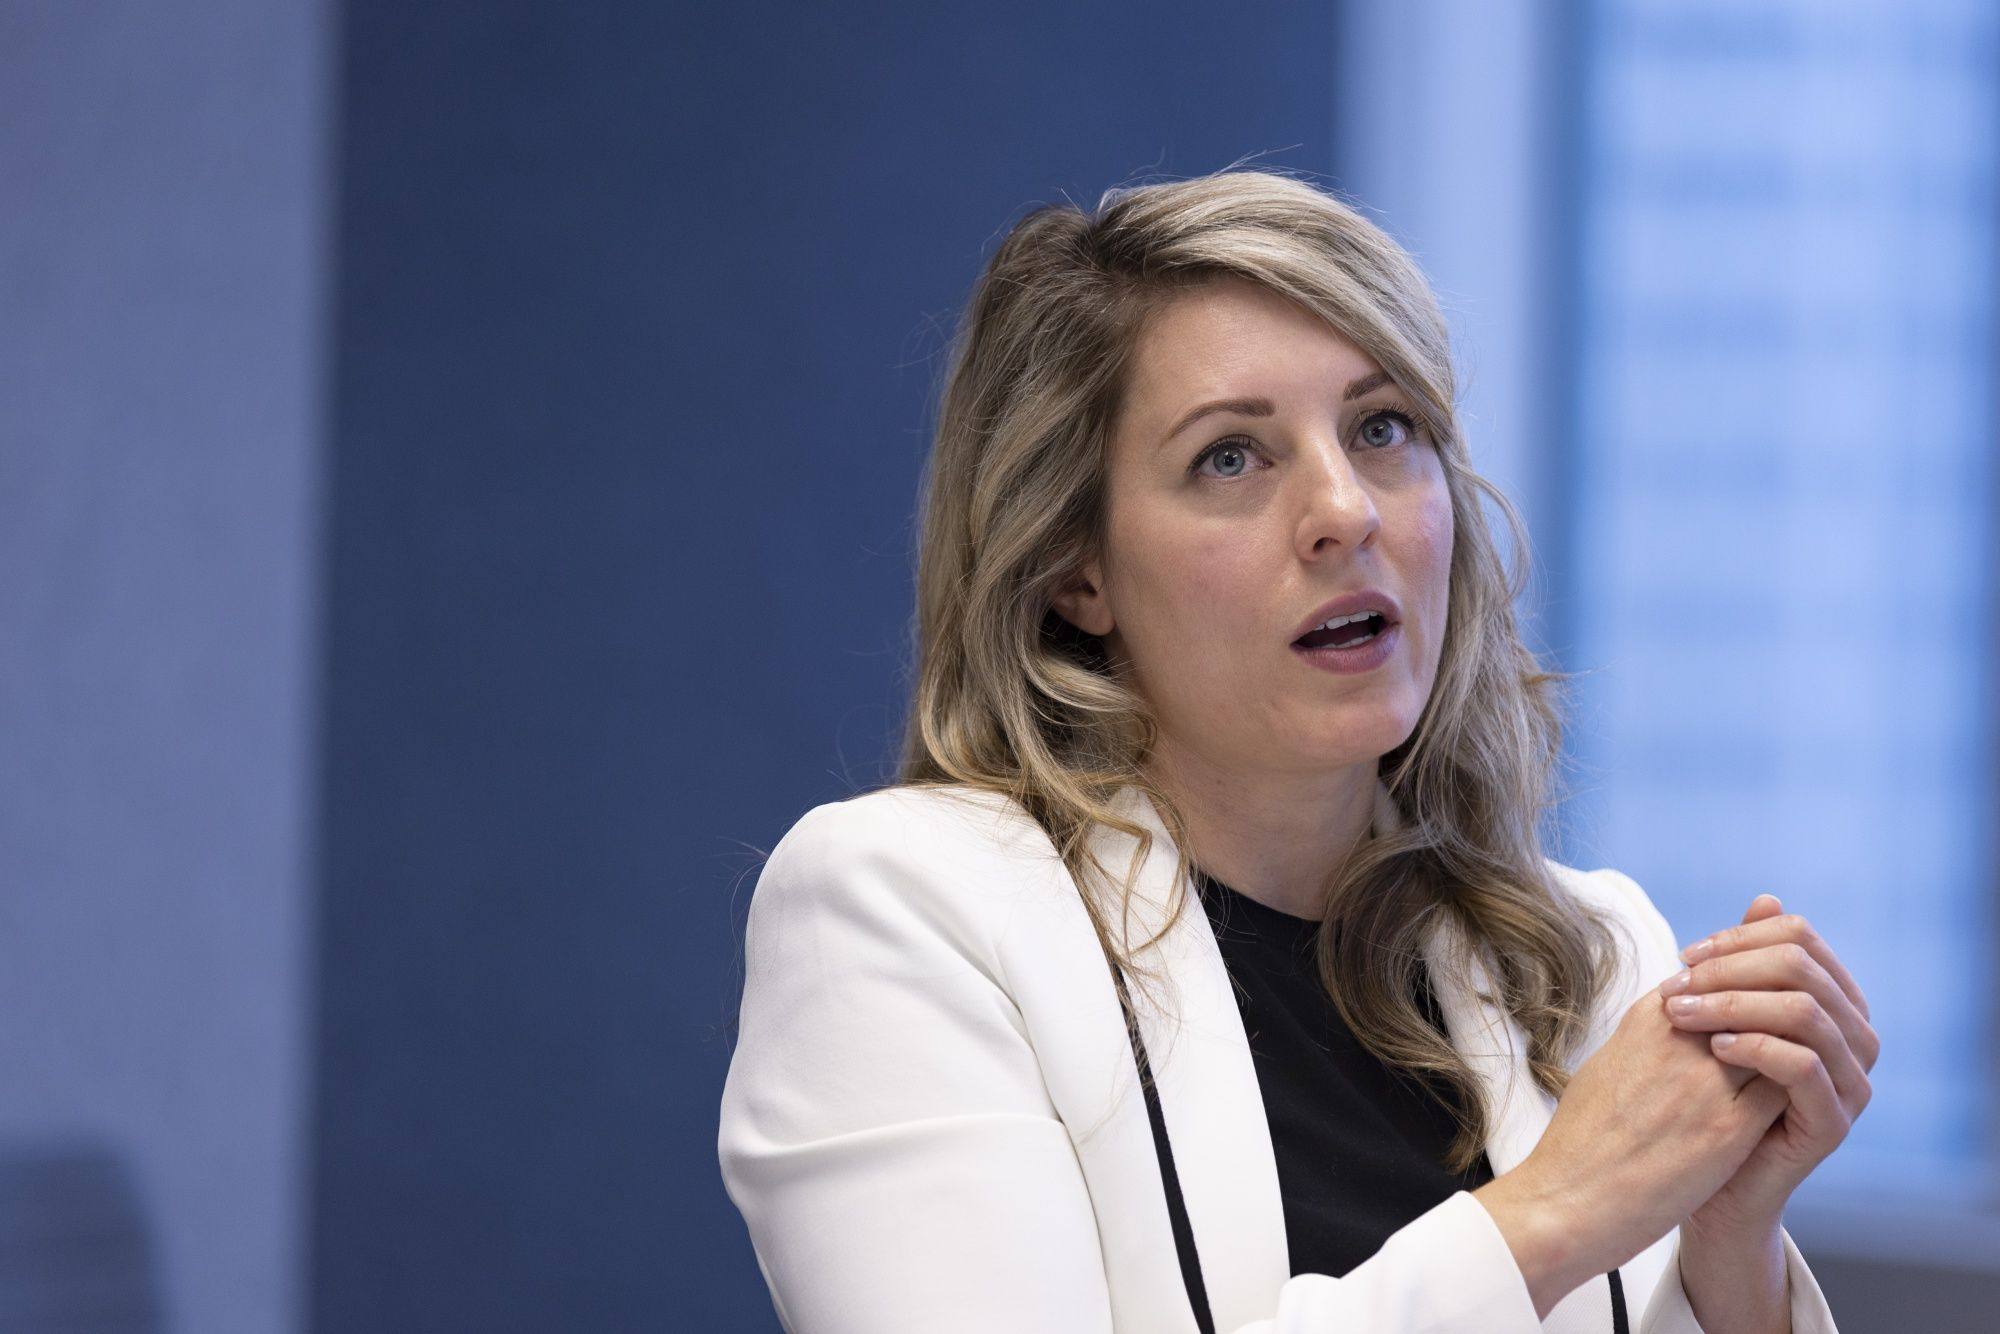 Melanie Joly, Canada’s foreign minister, will be visiting Seoul to discuss a pact. Photo: Bloomberg